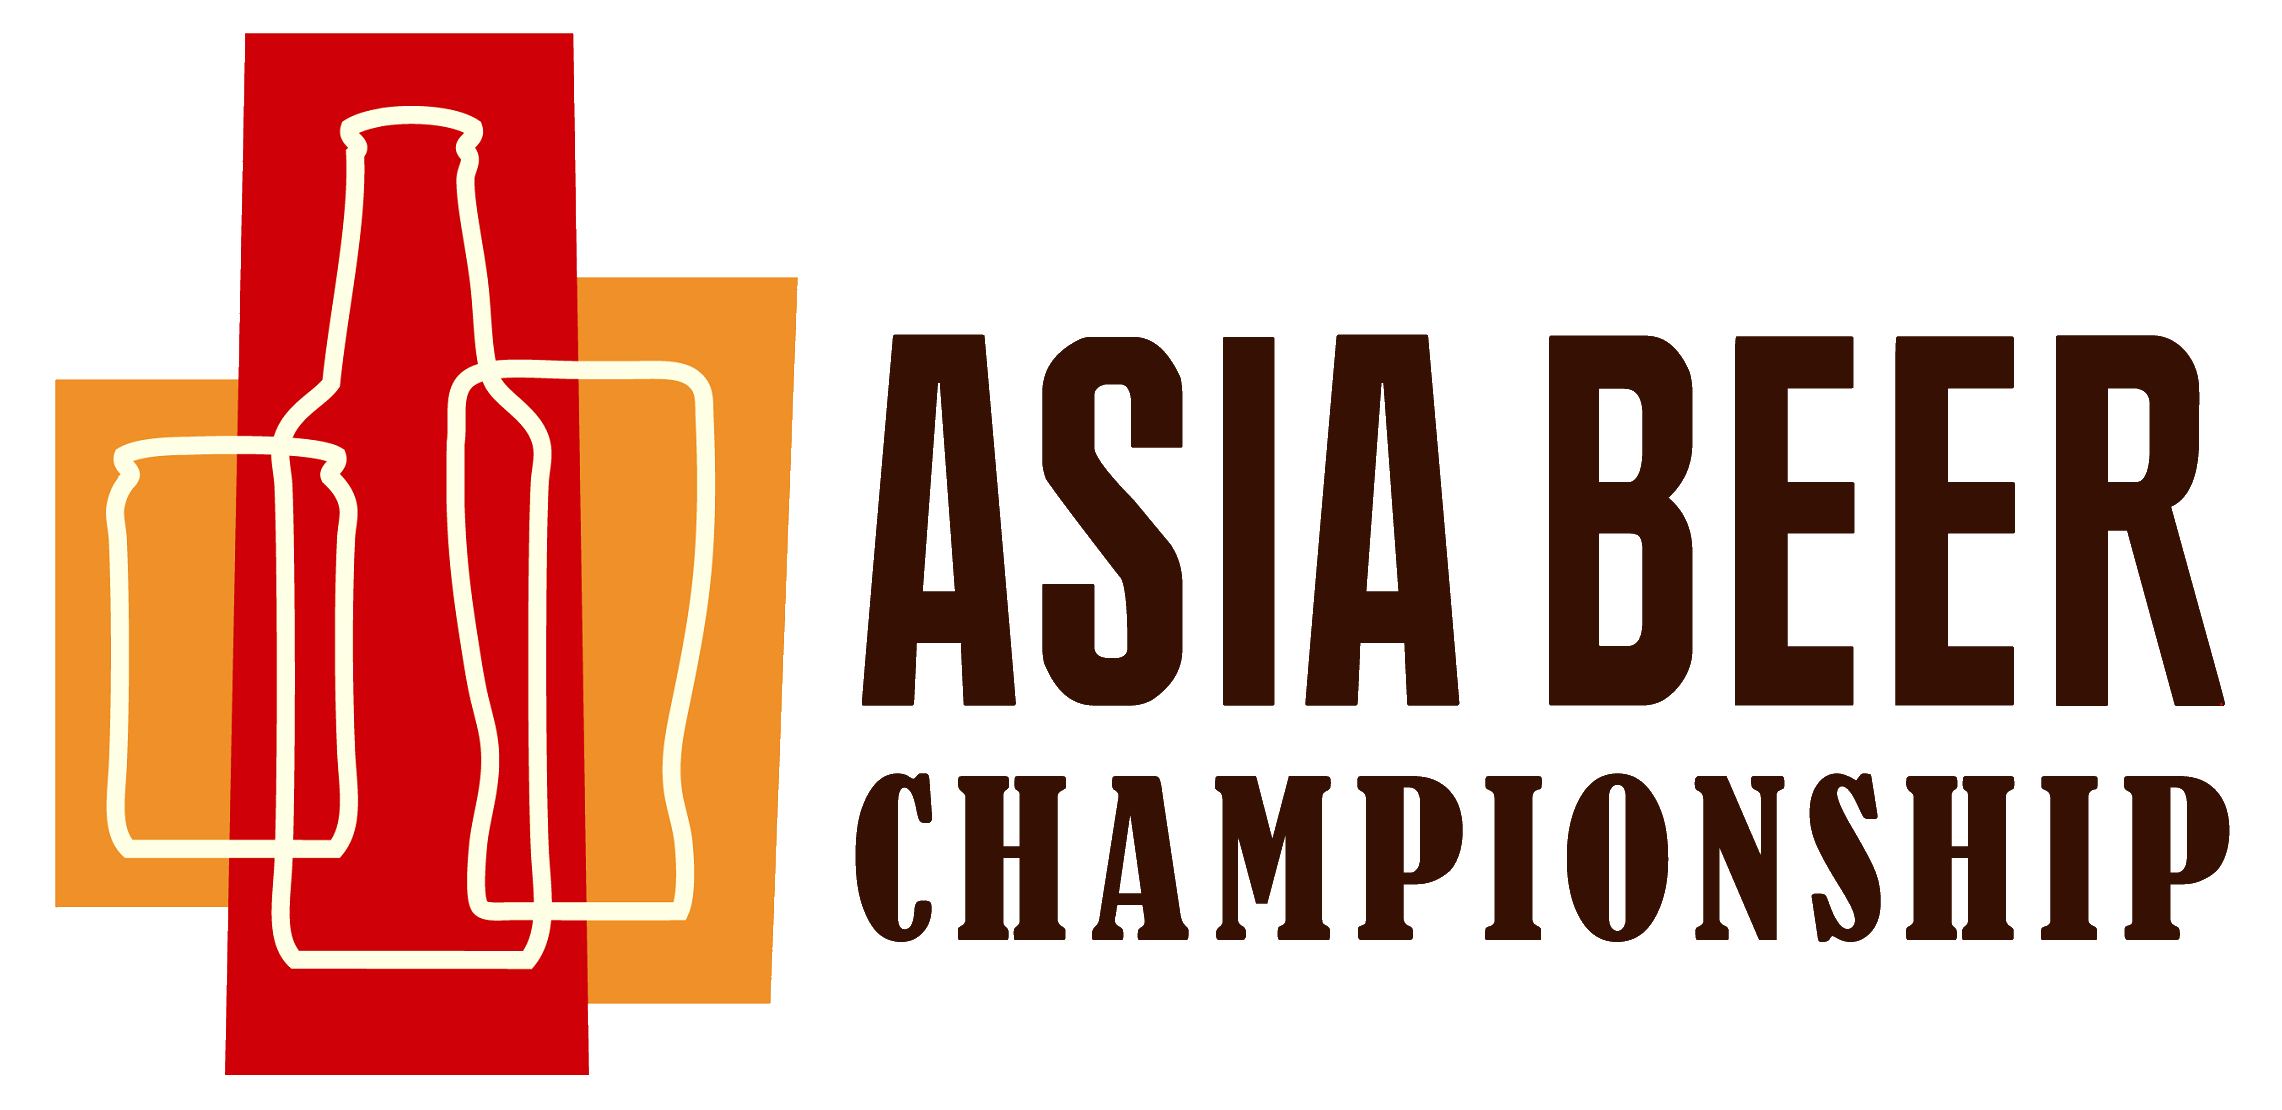 Asia Beer Championship